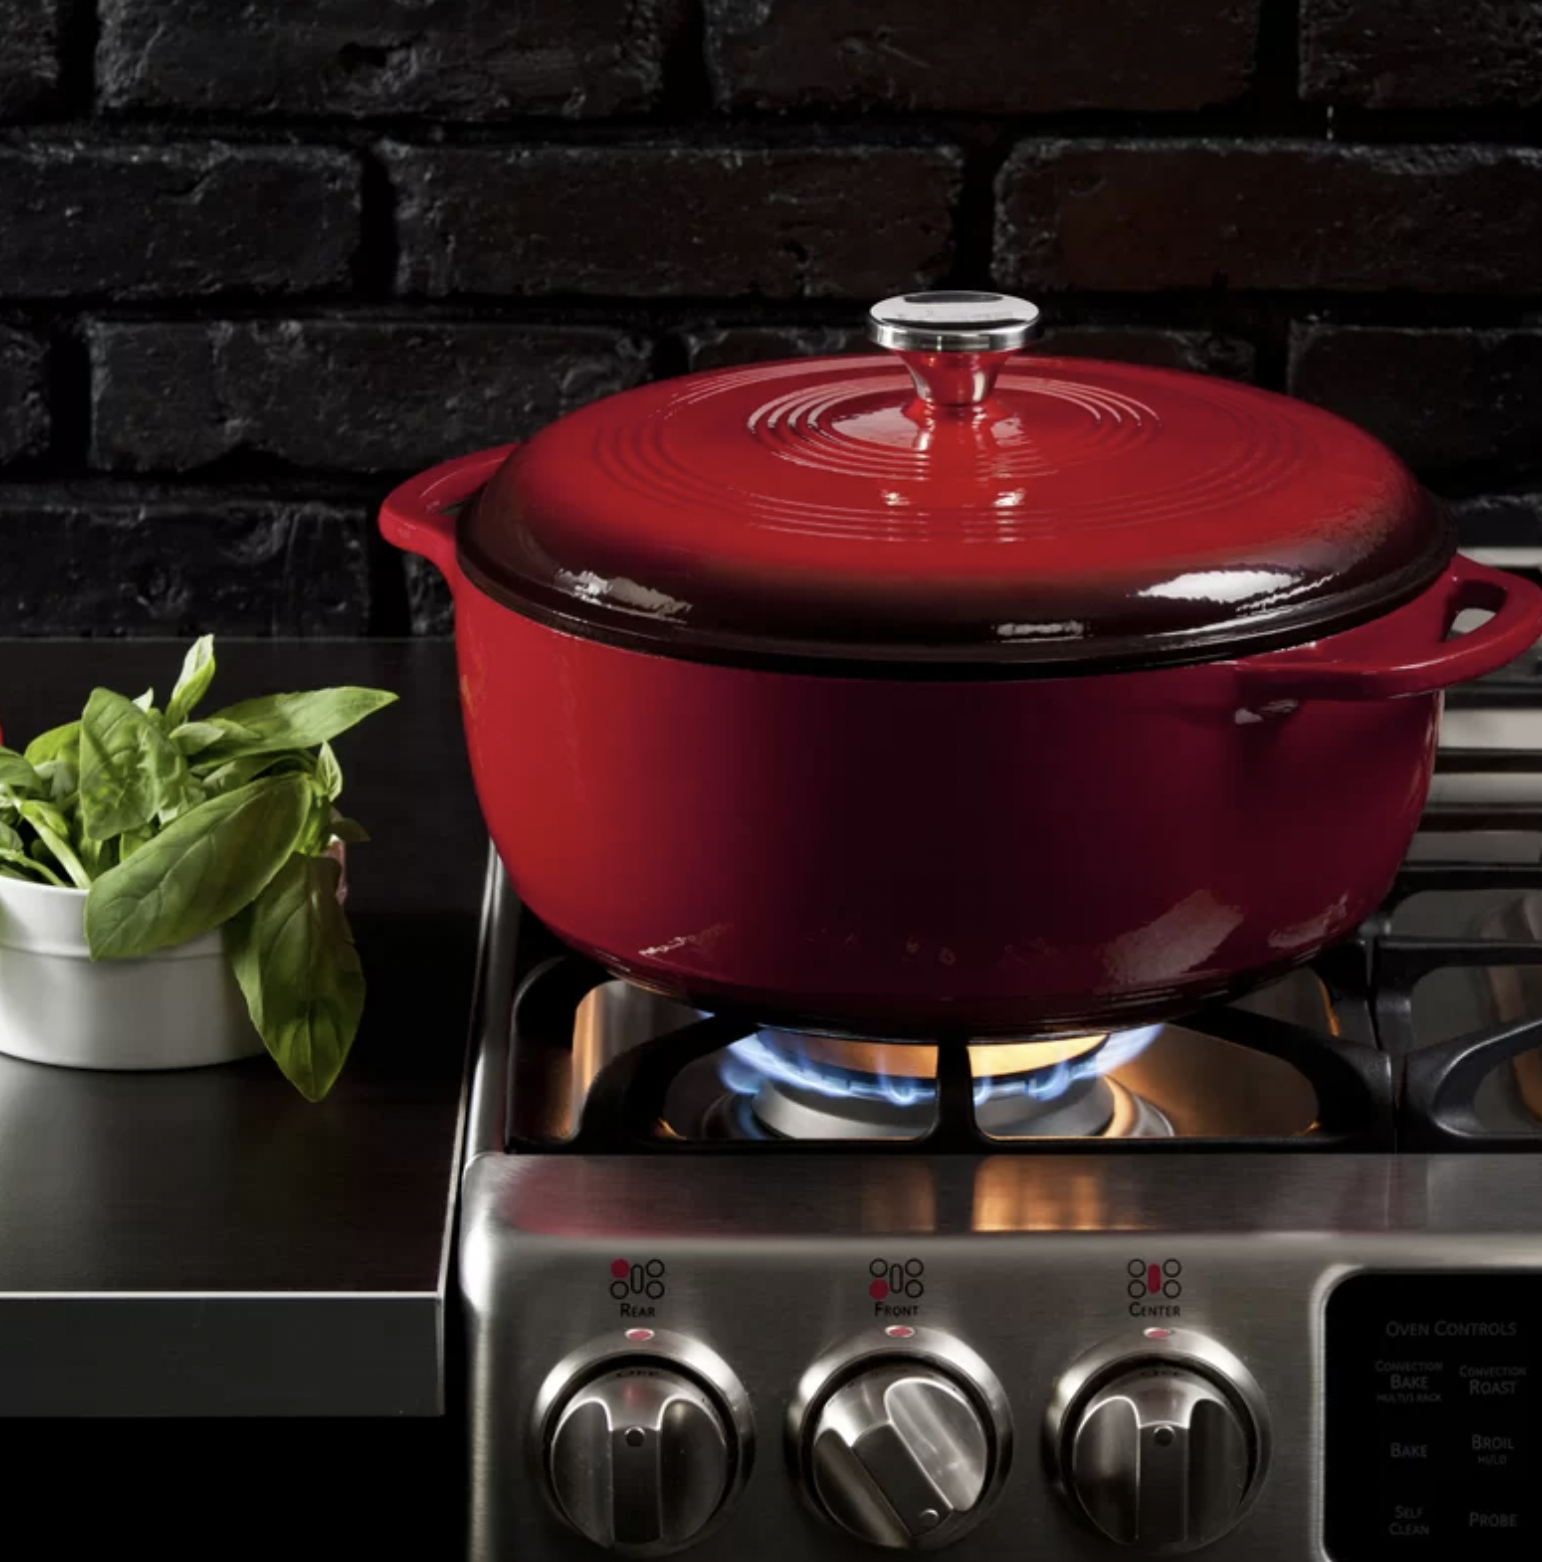 the red dutch oven on stovetop